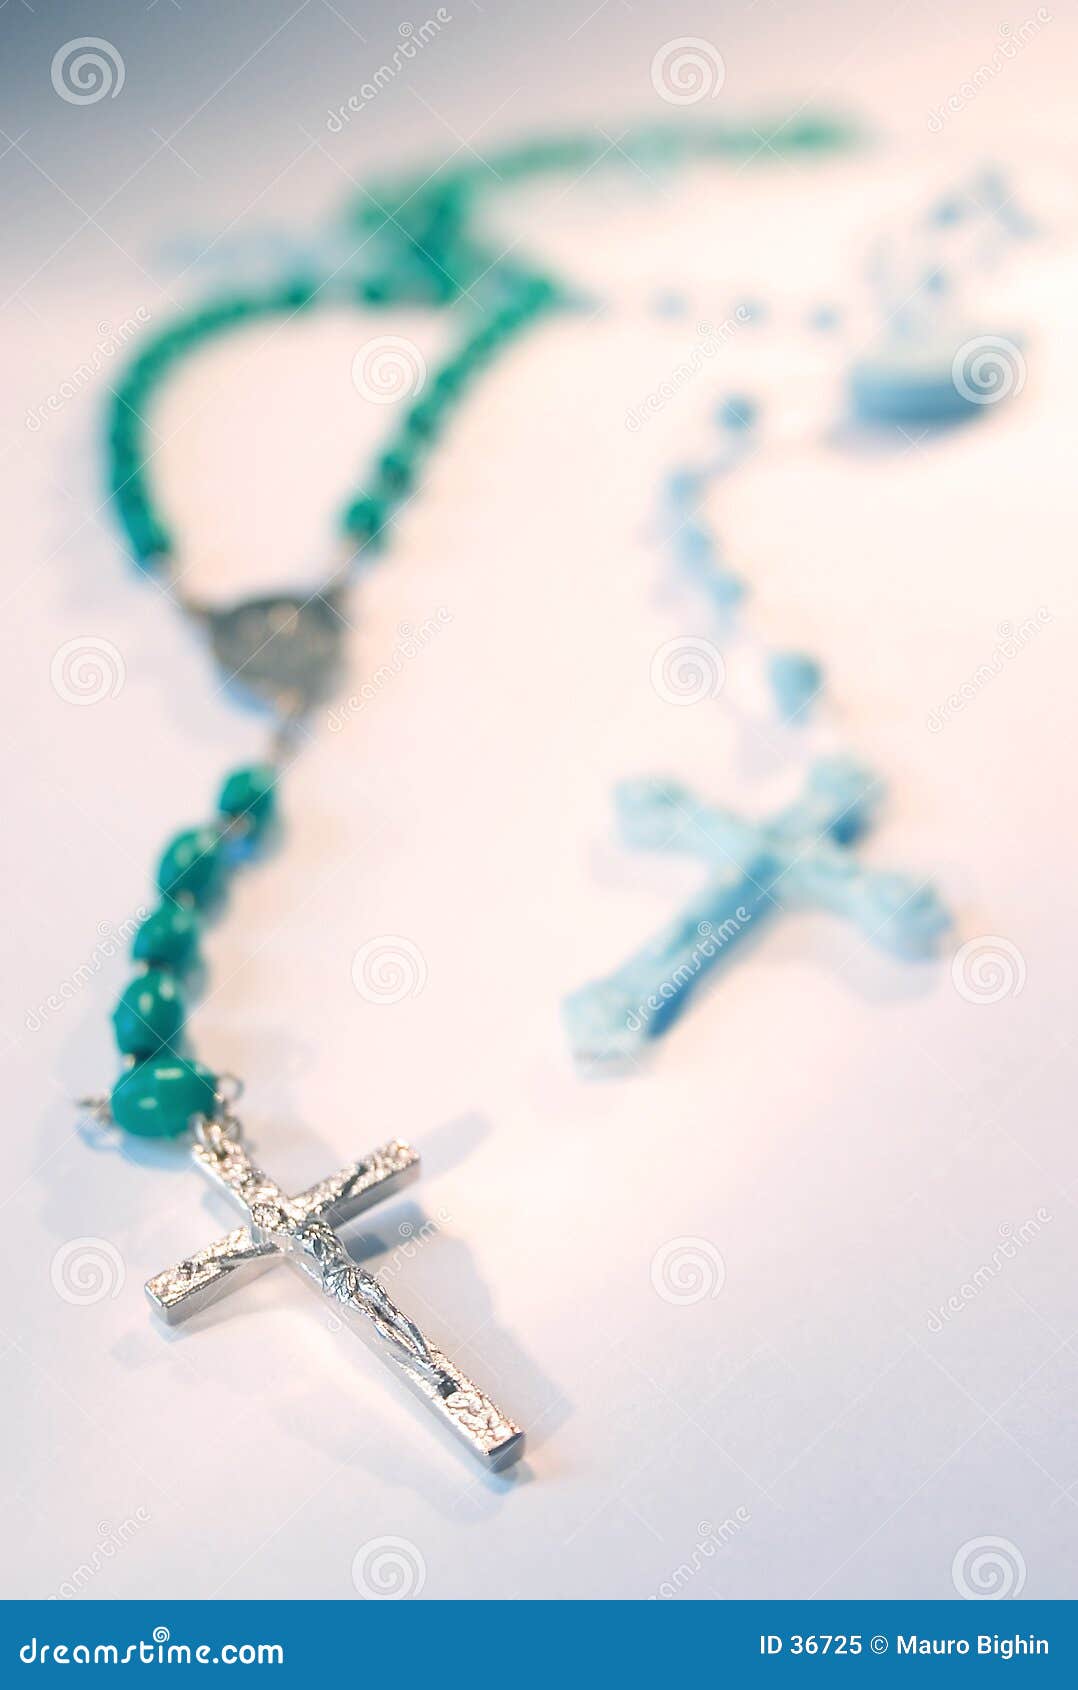 two rosaries